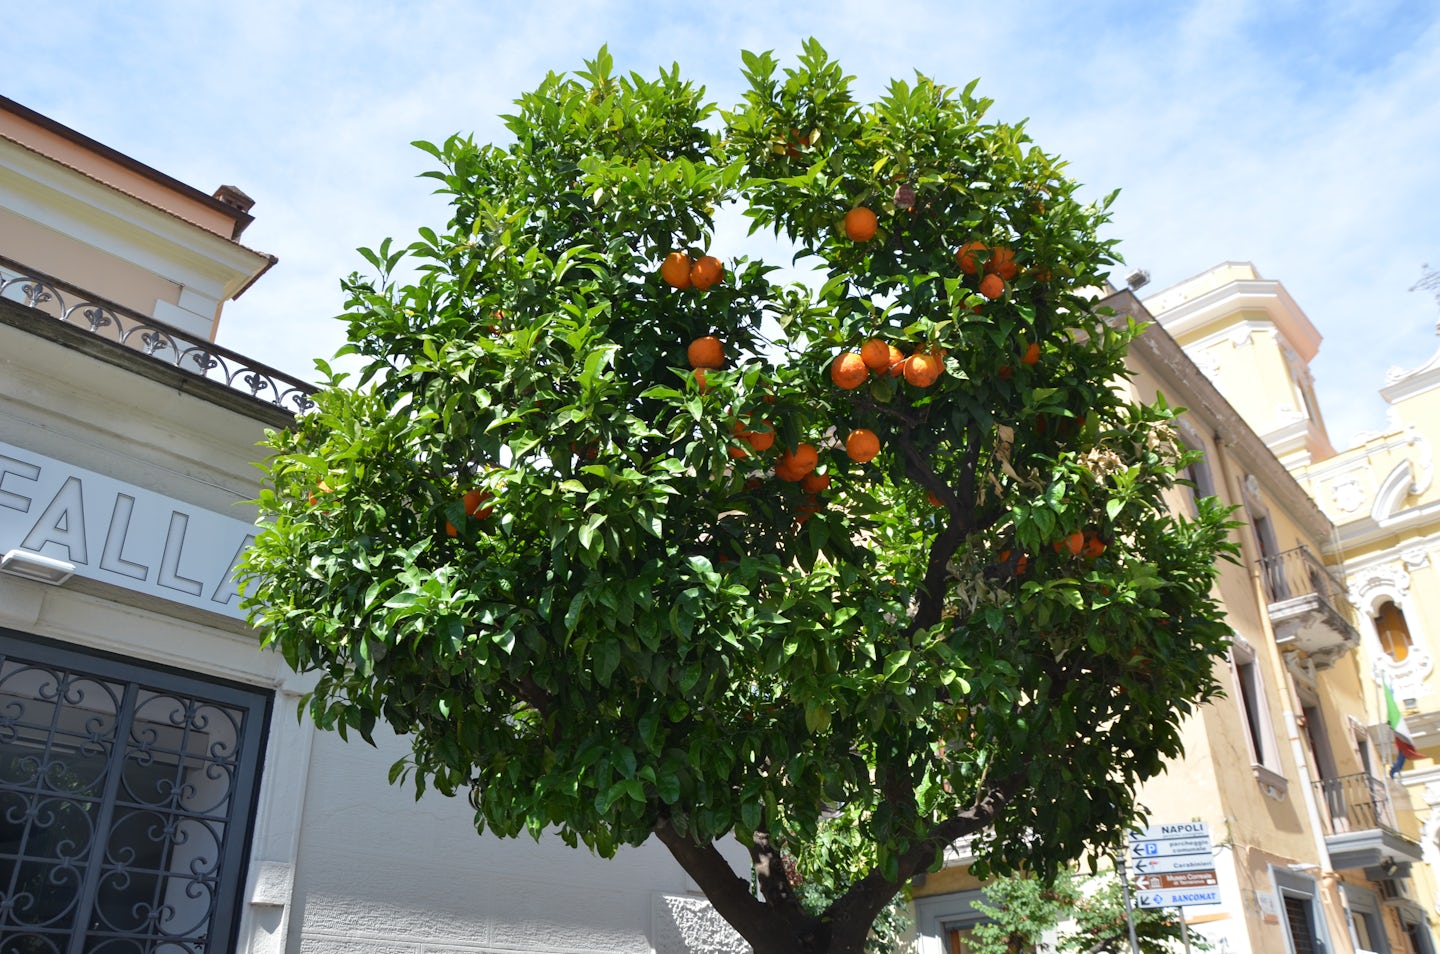 Trees laden with oranges in Sorrento - fragrance on the streets